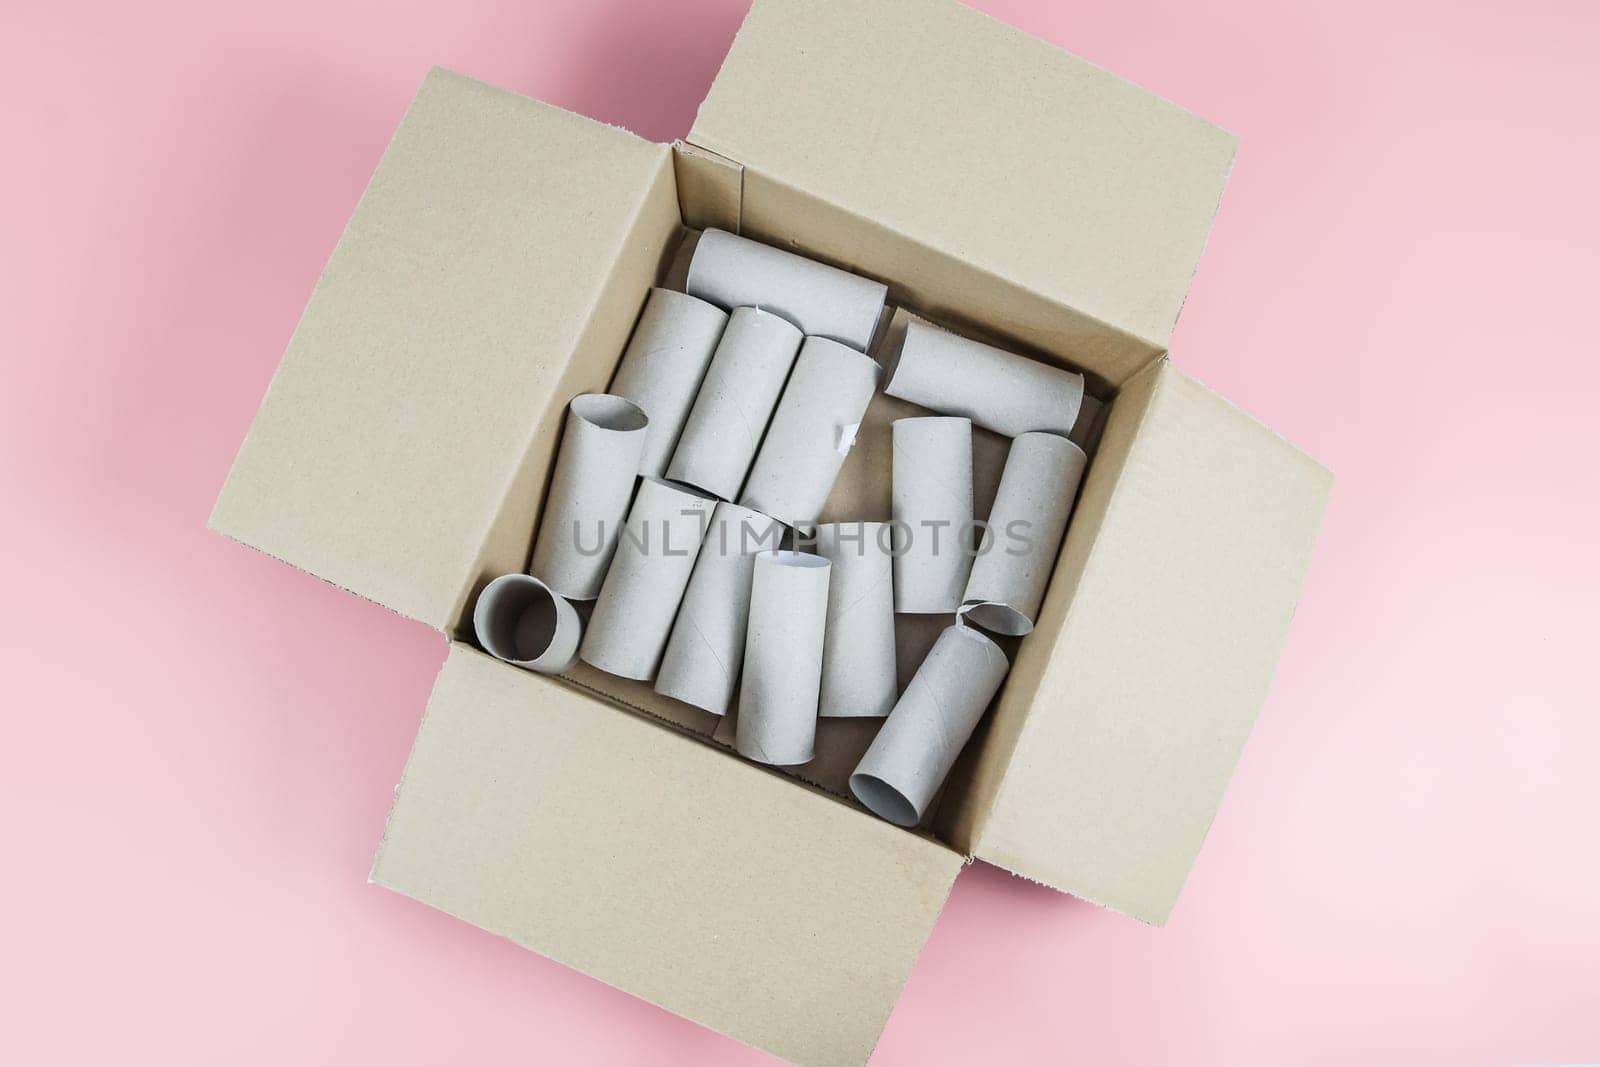 Toilet paper rolls in a cardboard box on a pink background. by Nataliya